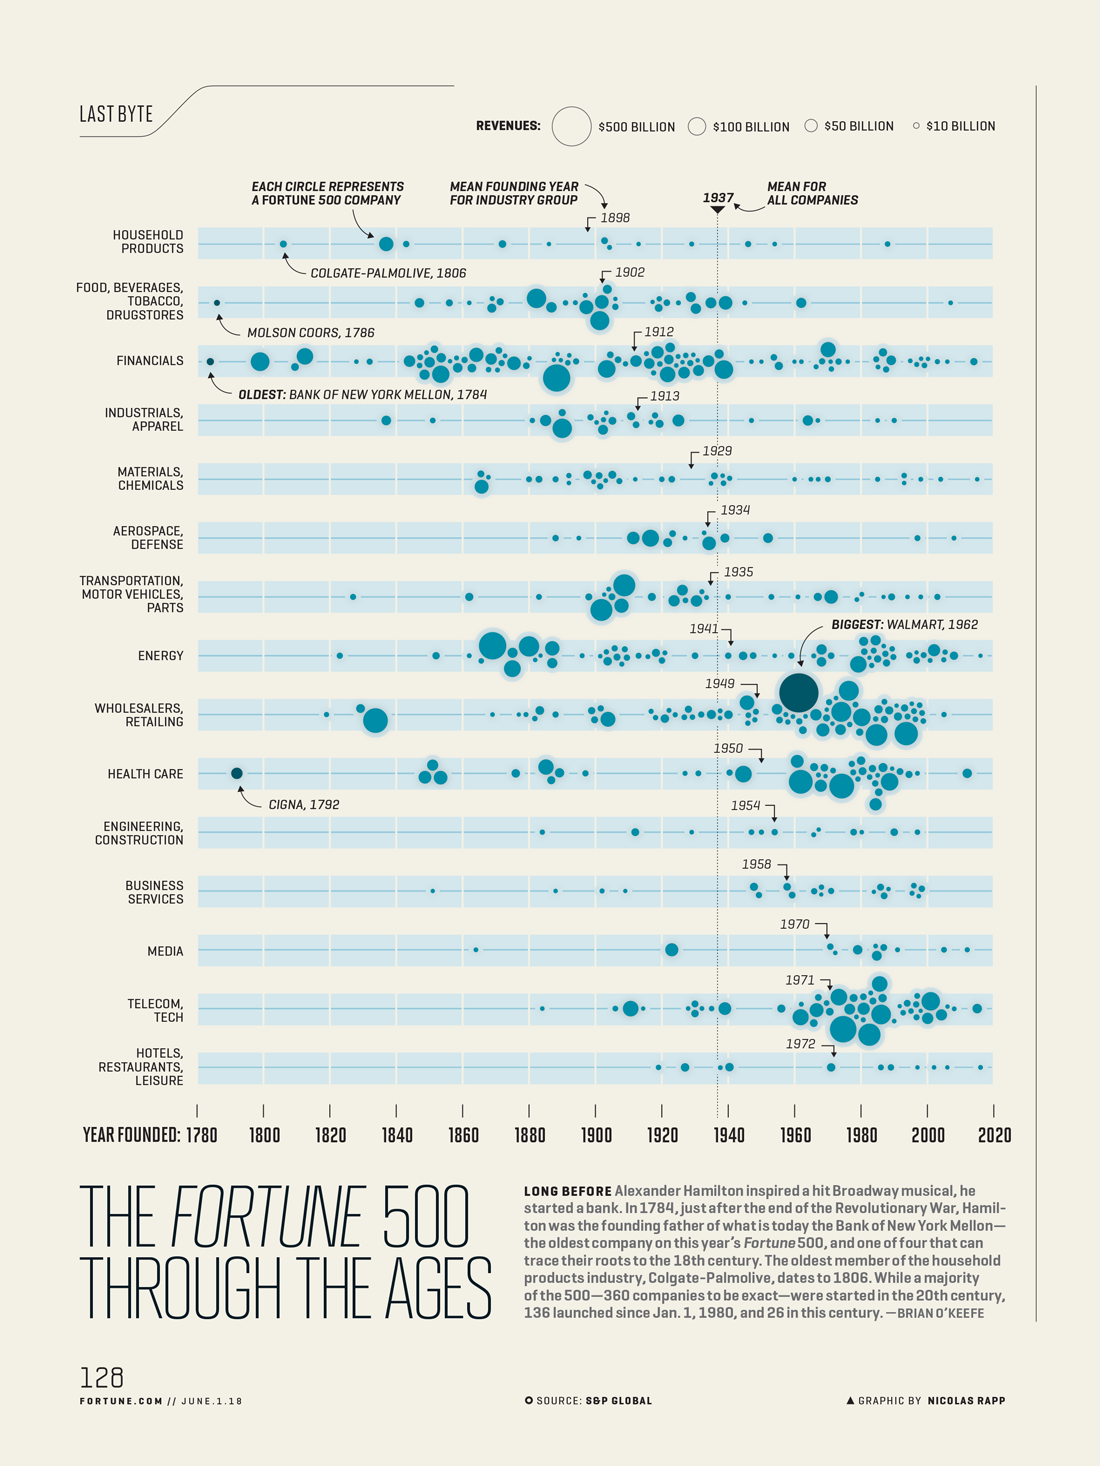 The ages of Fortune 500 companies